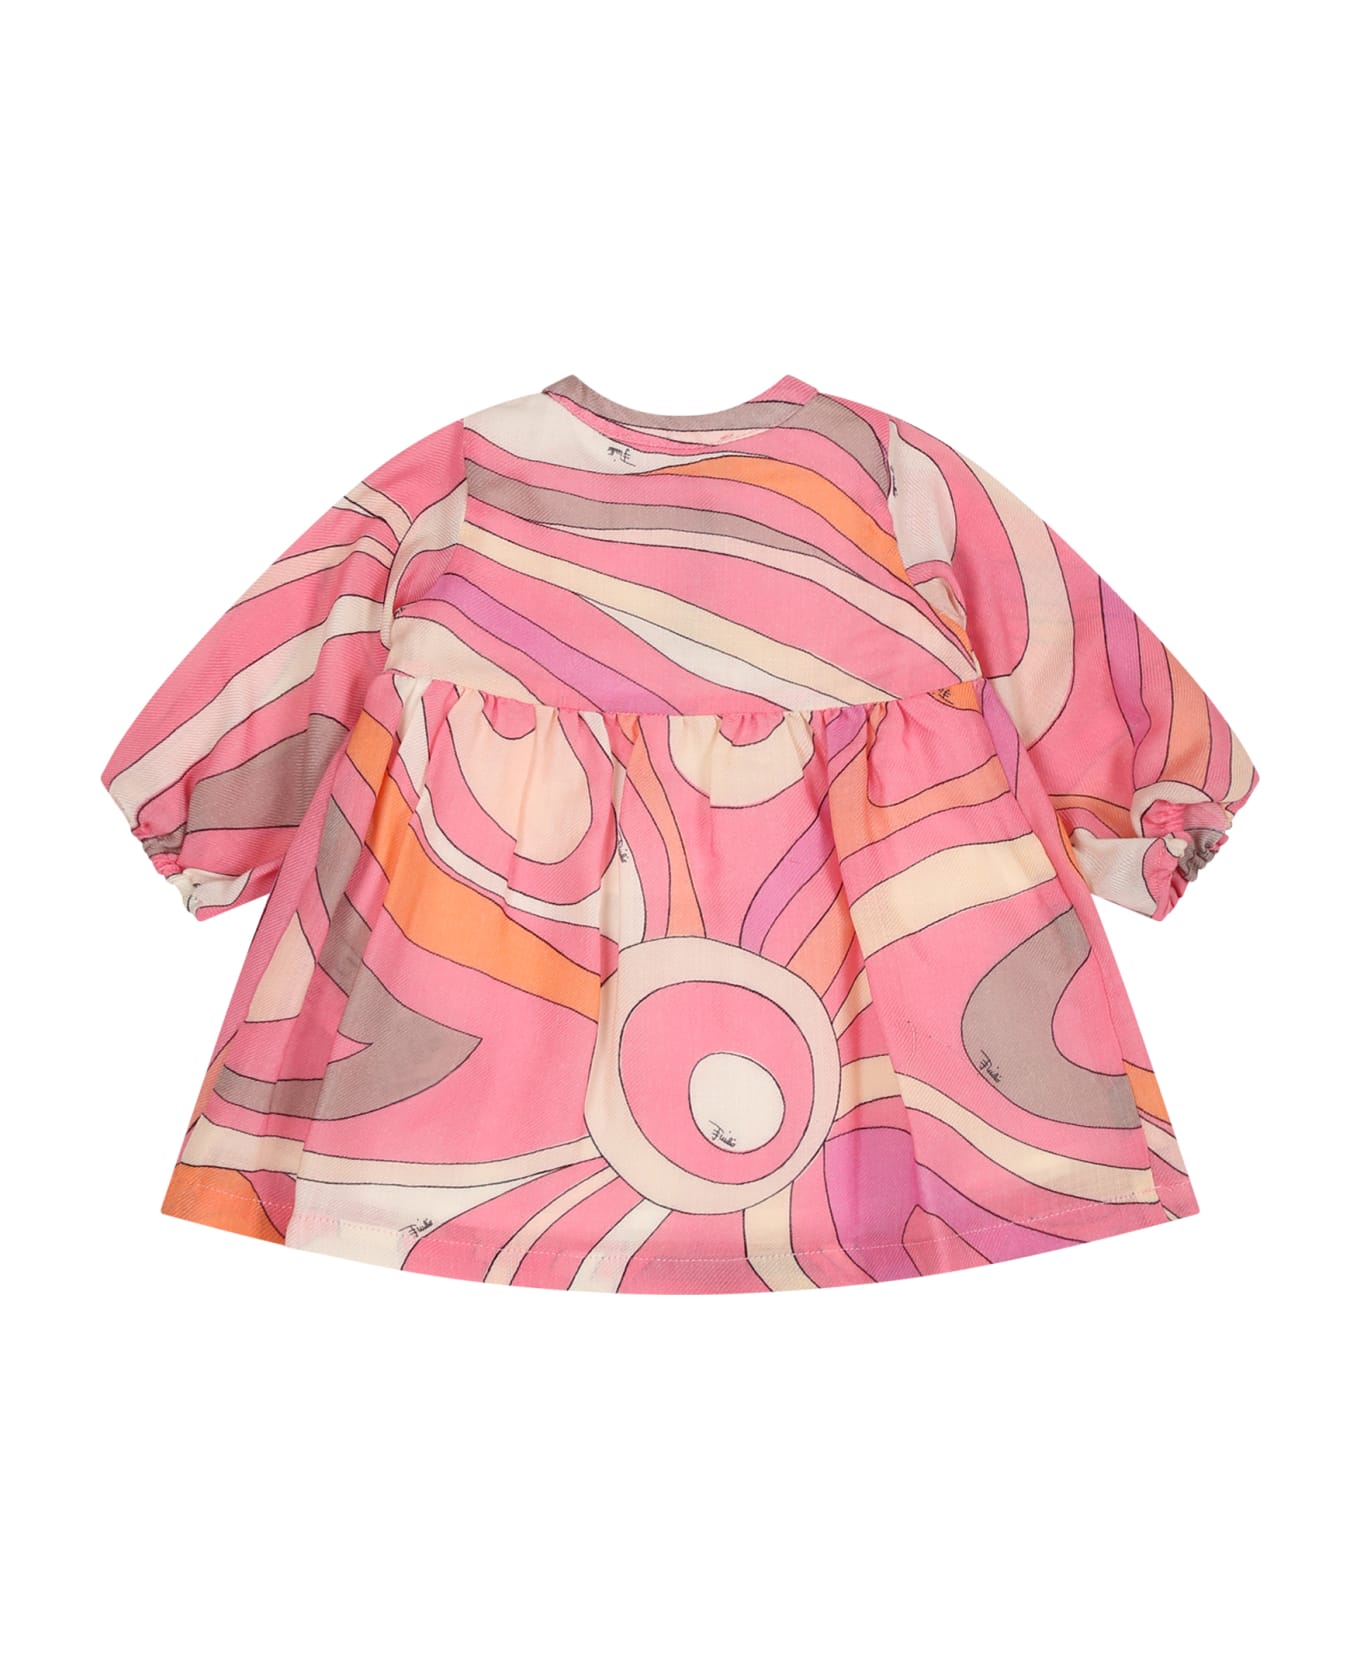 Pucci Pink Dress For Baby Girl With Logo - Multicolor